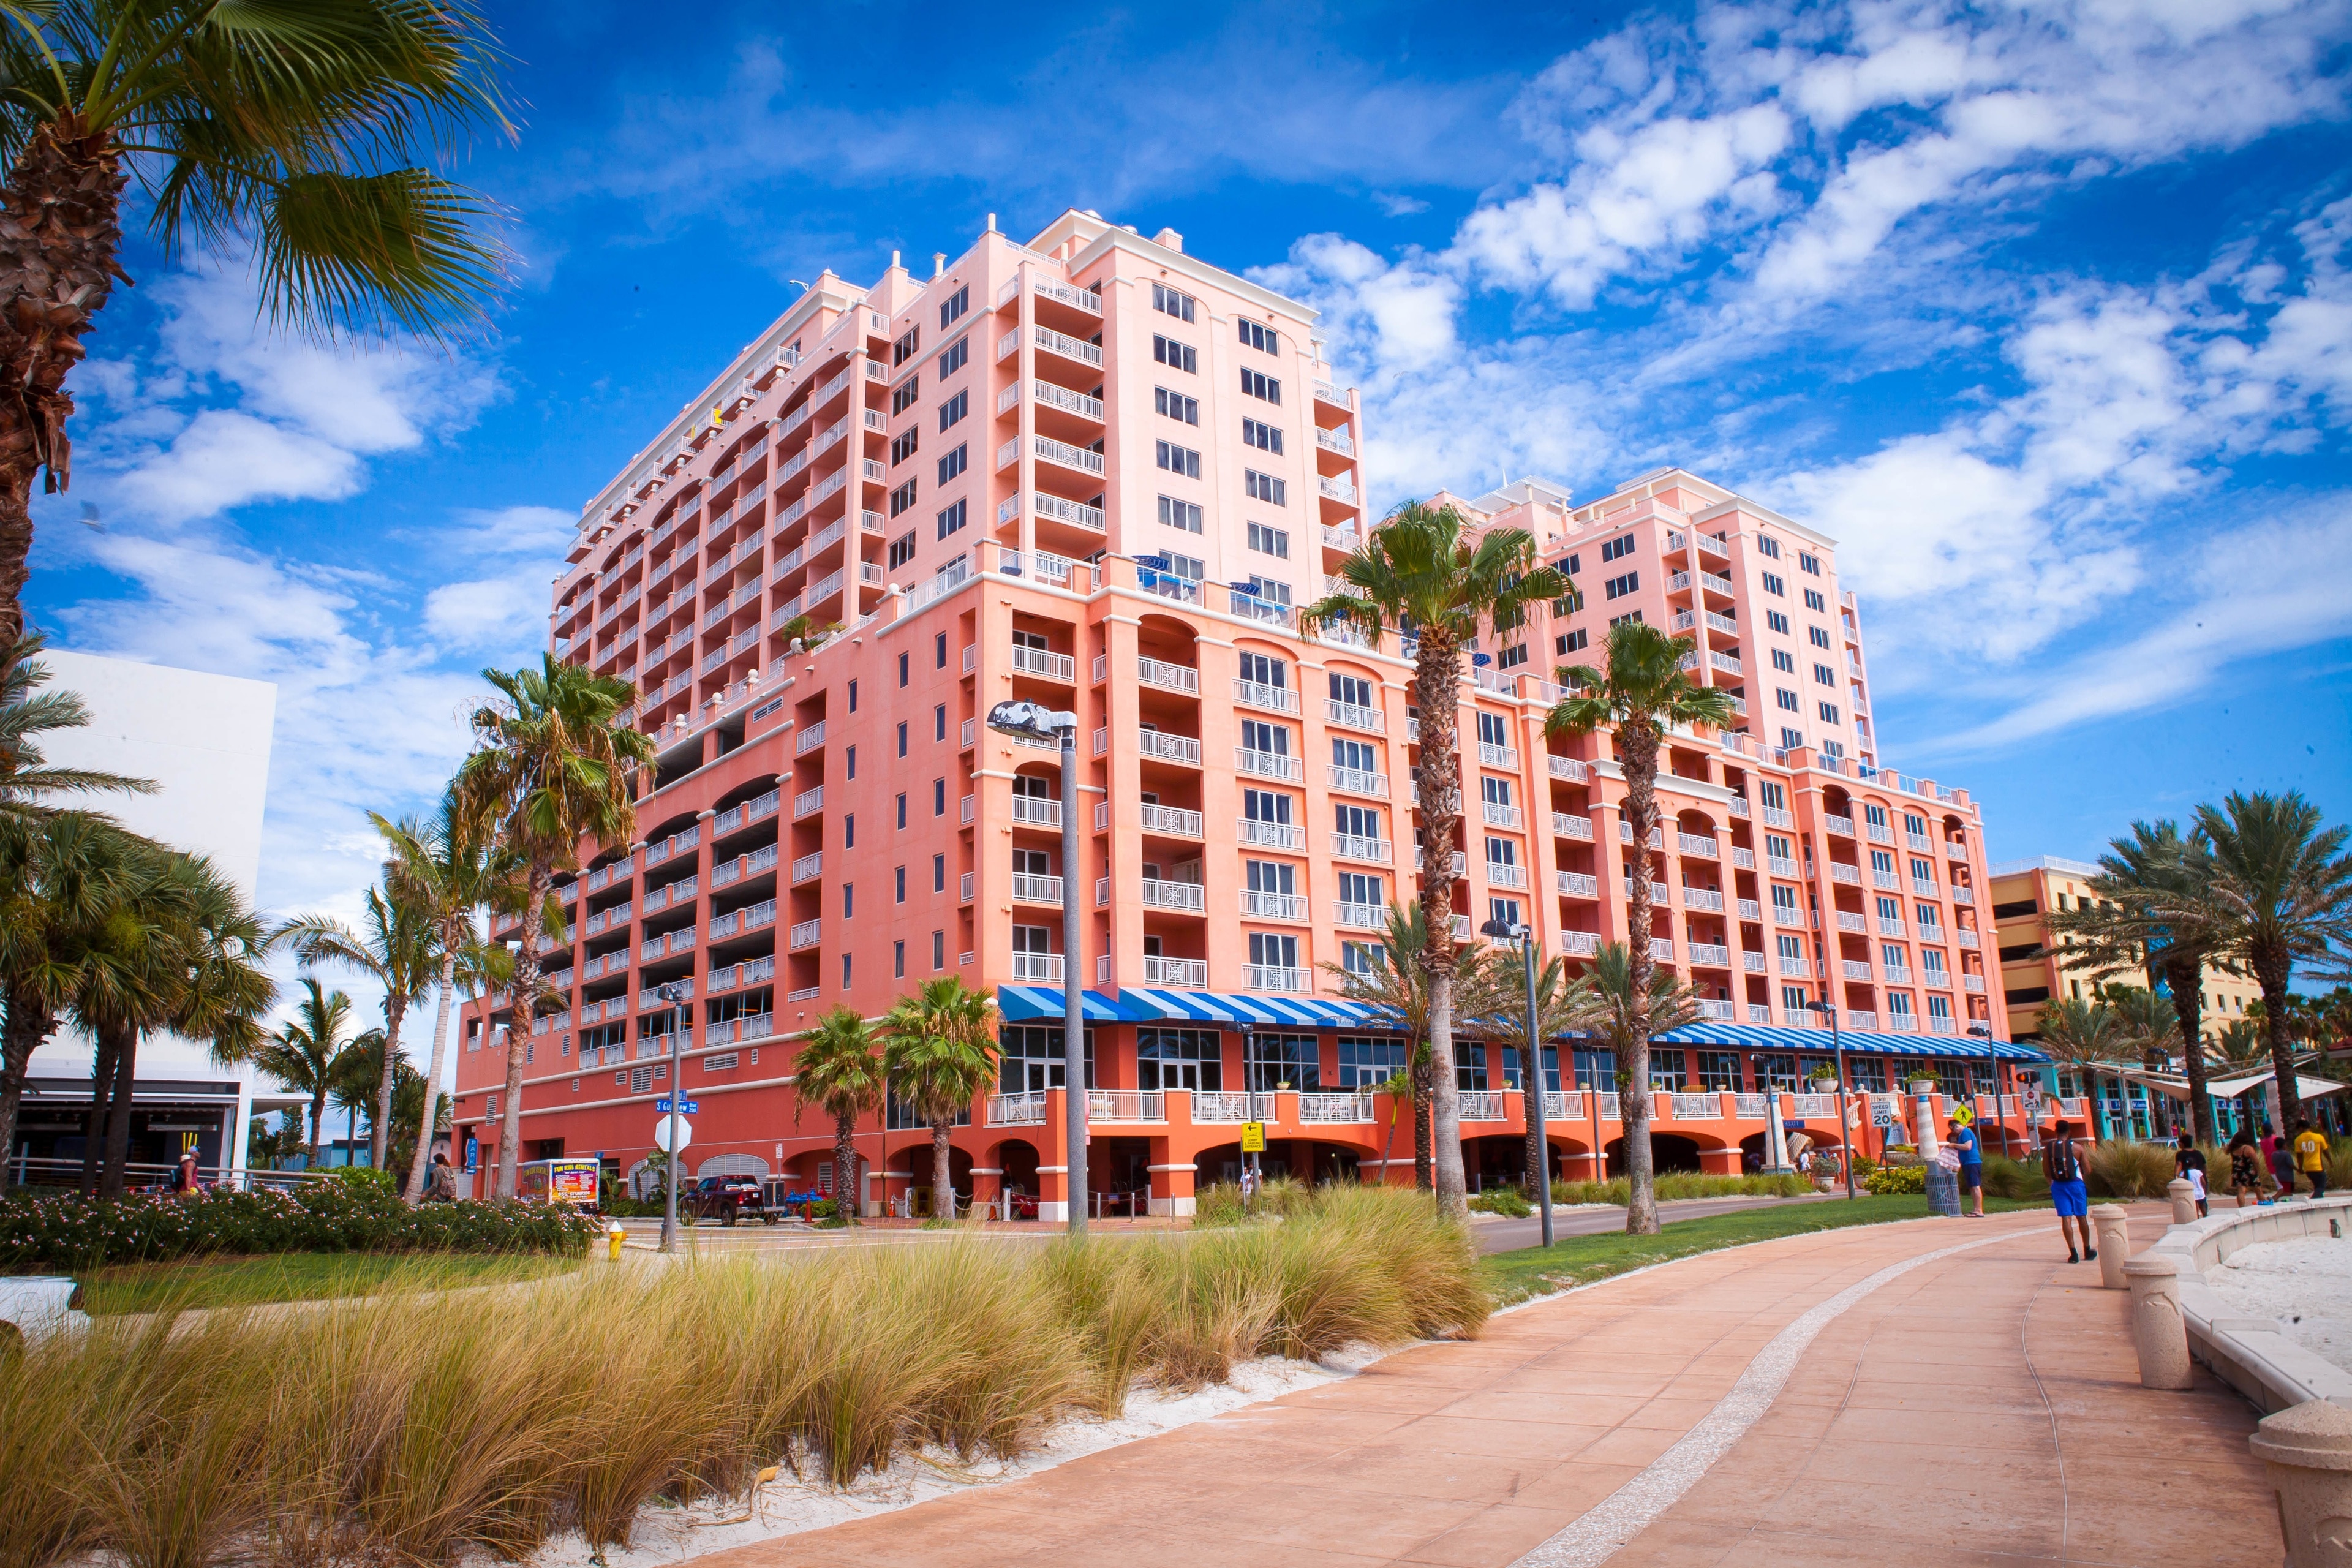 Clearwater, FL Vacation Rentals house rentals & more   Vrbo